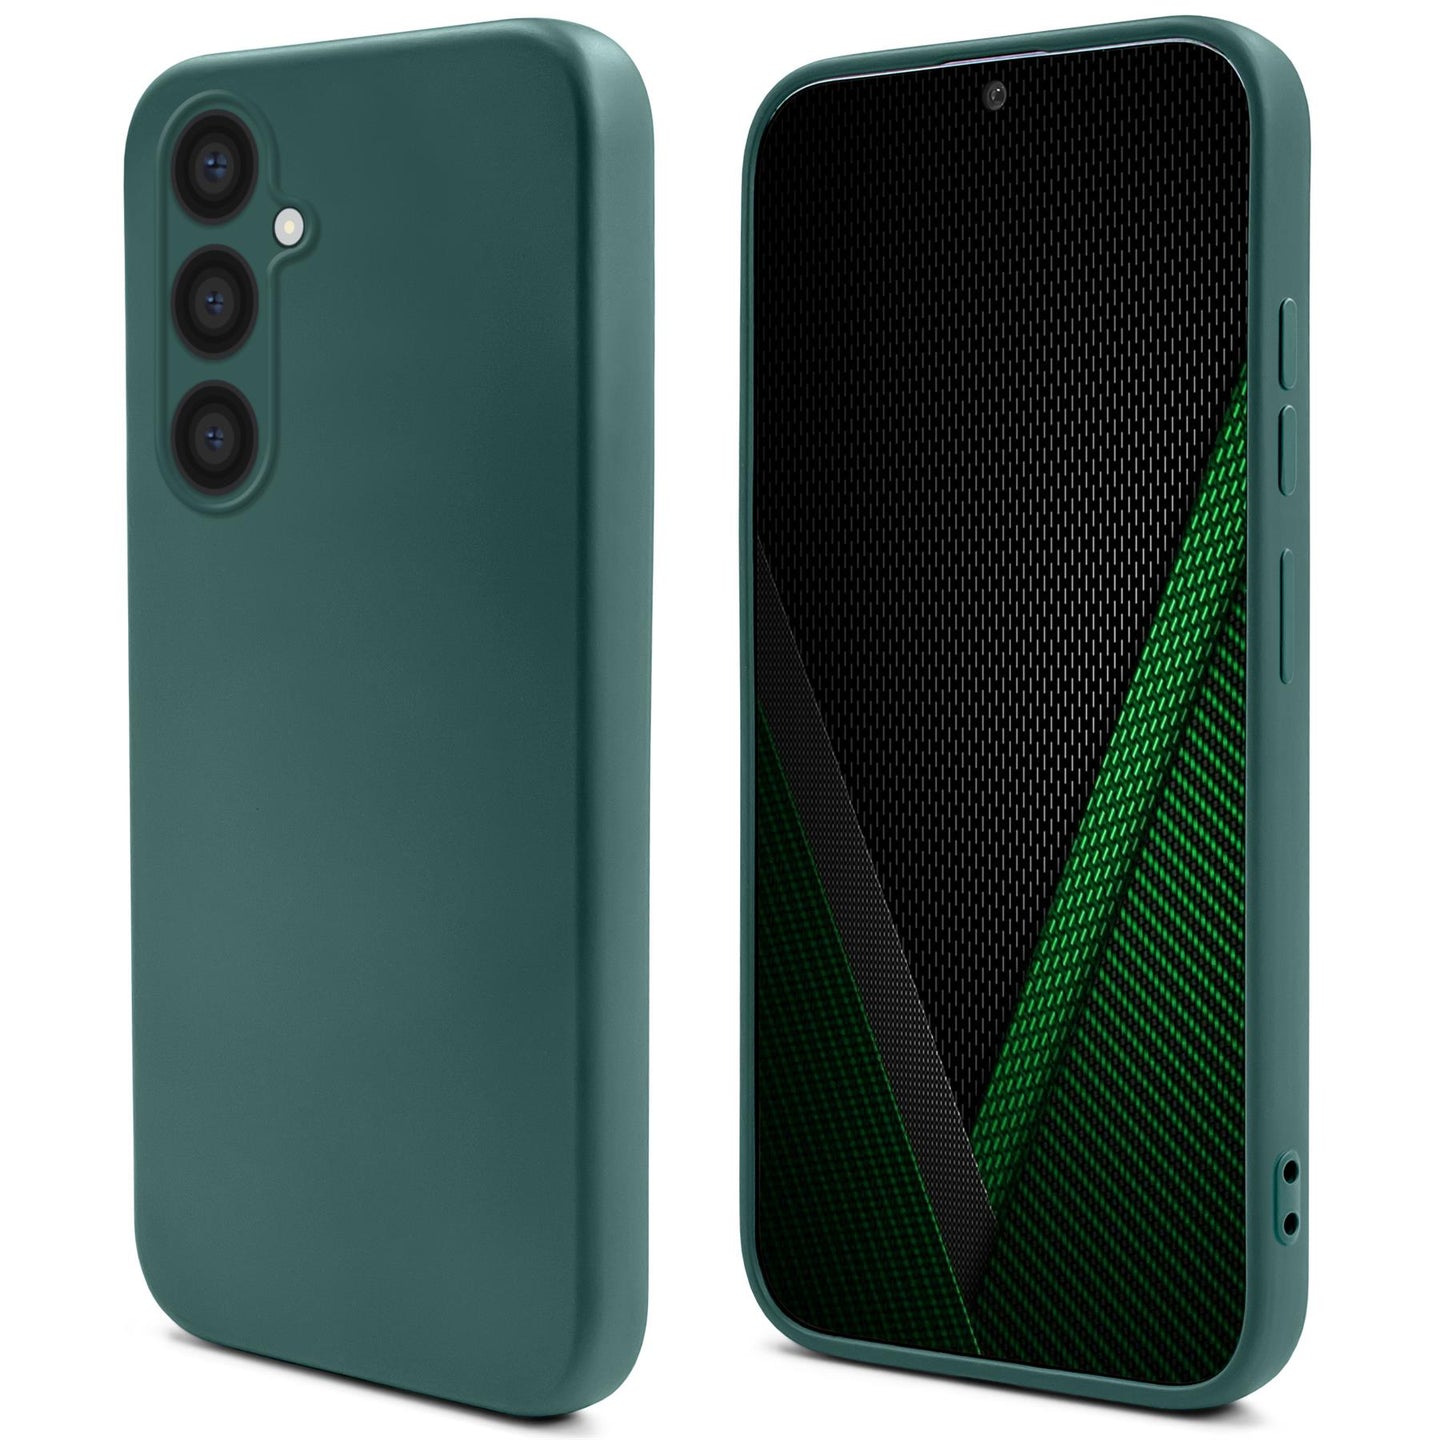 Moozy Lifestyle. Silicone Case for Samsung A54 5G, Dark Green - Liquid Silicone Lightweight Cover with Matte Finish and Soft Microfiber Lining, Premium Silicone Case